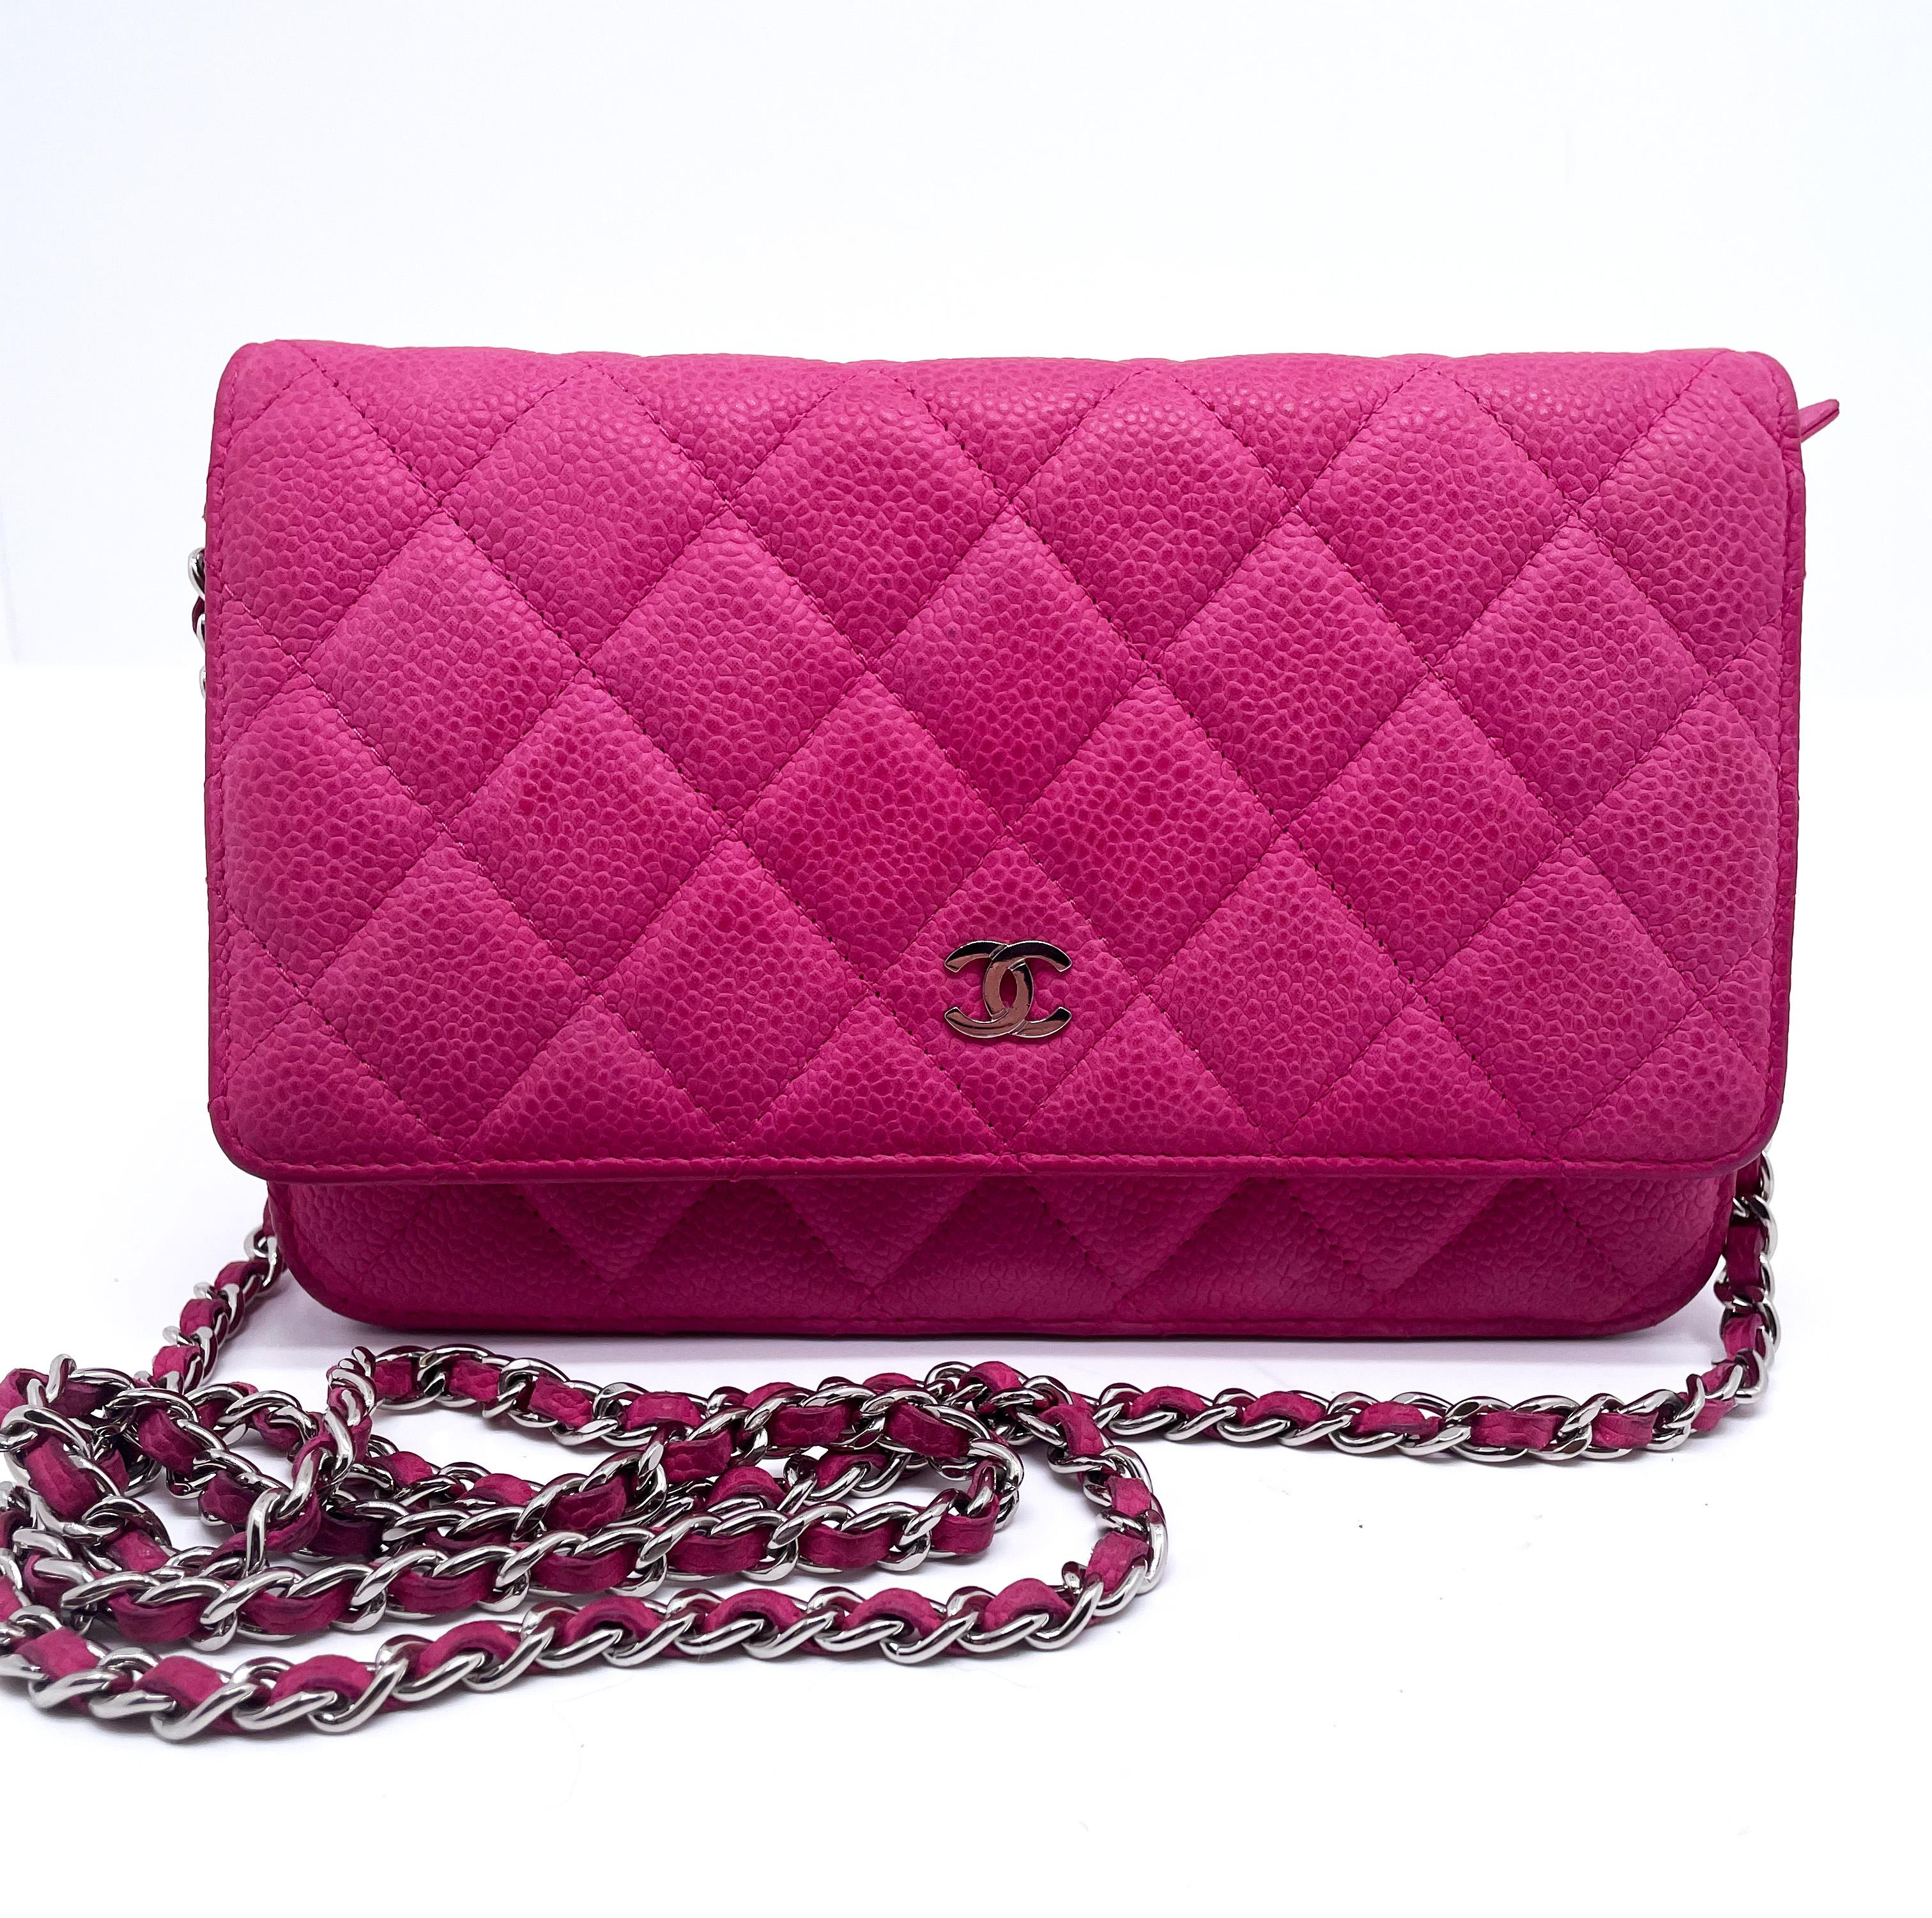 This fuschia pink Chanel Wallet on chain is made of quilted Grained Calfskin.
The caviar leather woc bag has a golden chain 150 cm long with a small
golden 'CC' logo on the flap. The inside of the bag offers space for
cards and other personal